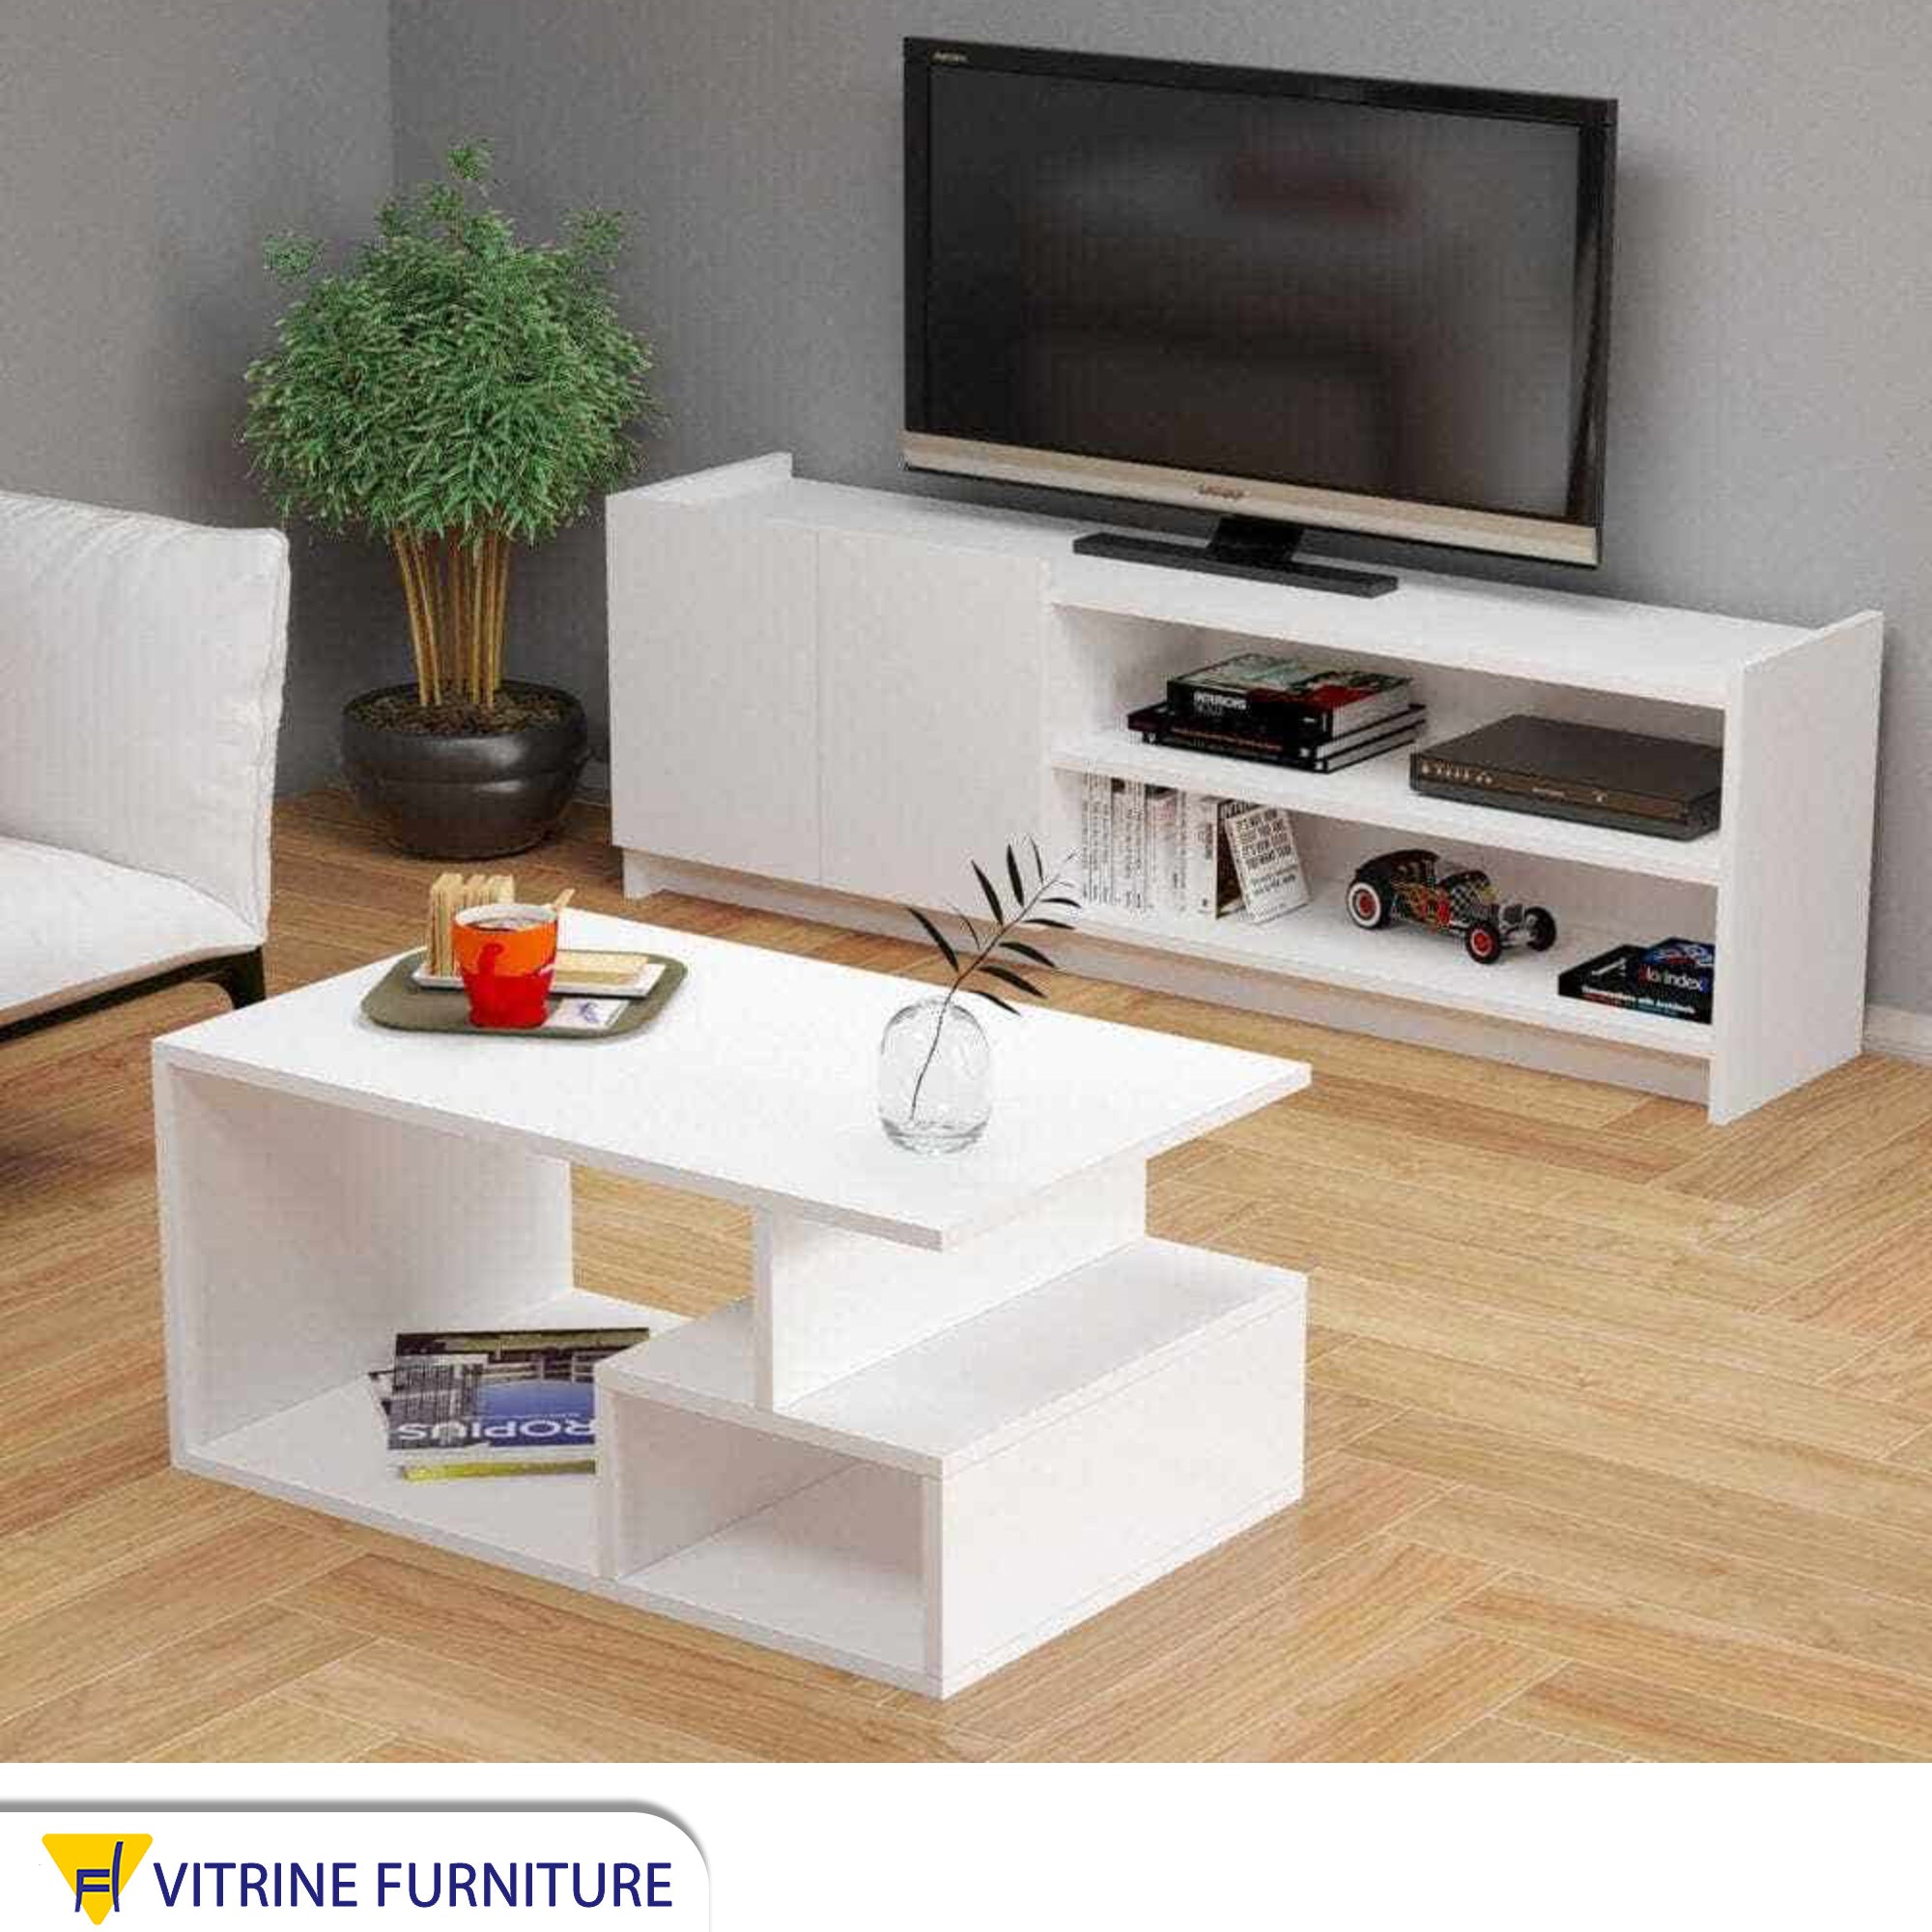 TV library with table